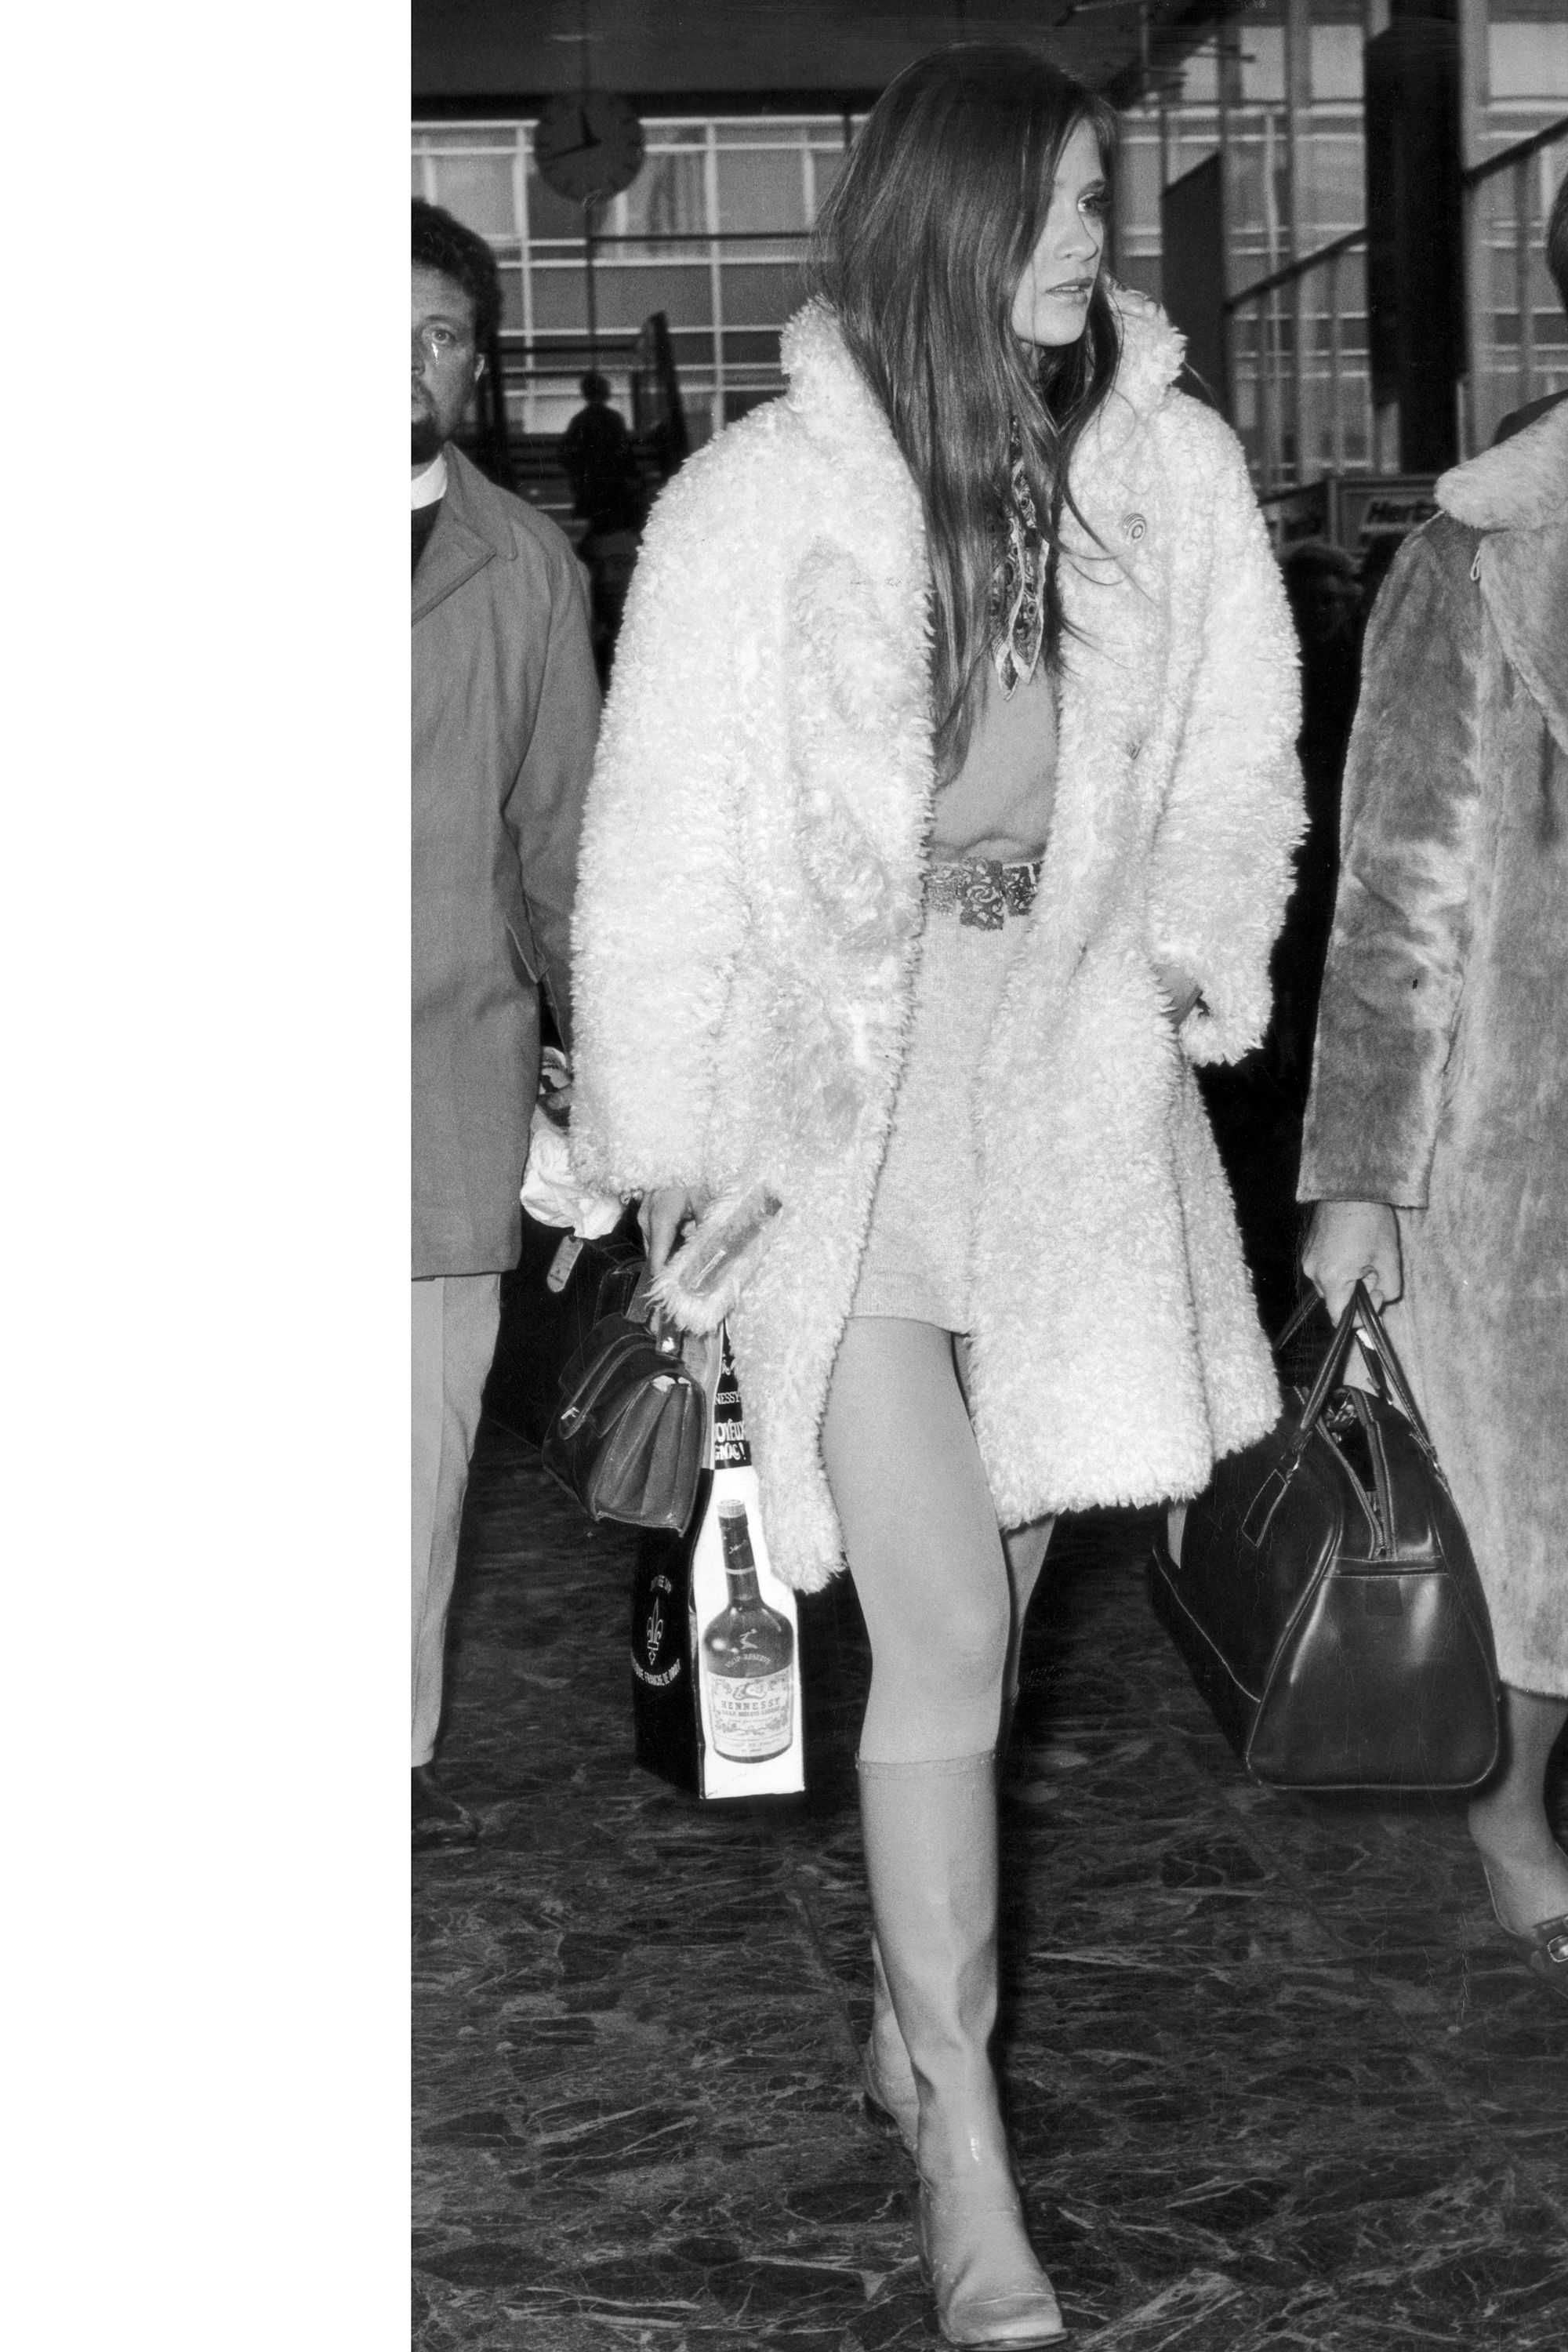 25 Most Iconic 70s Fashion Trends that Defined the 'Me Decade